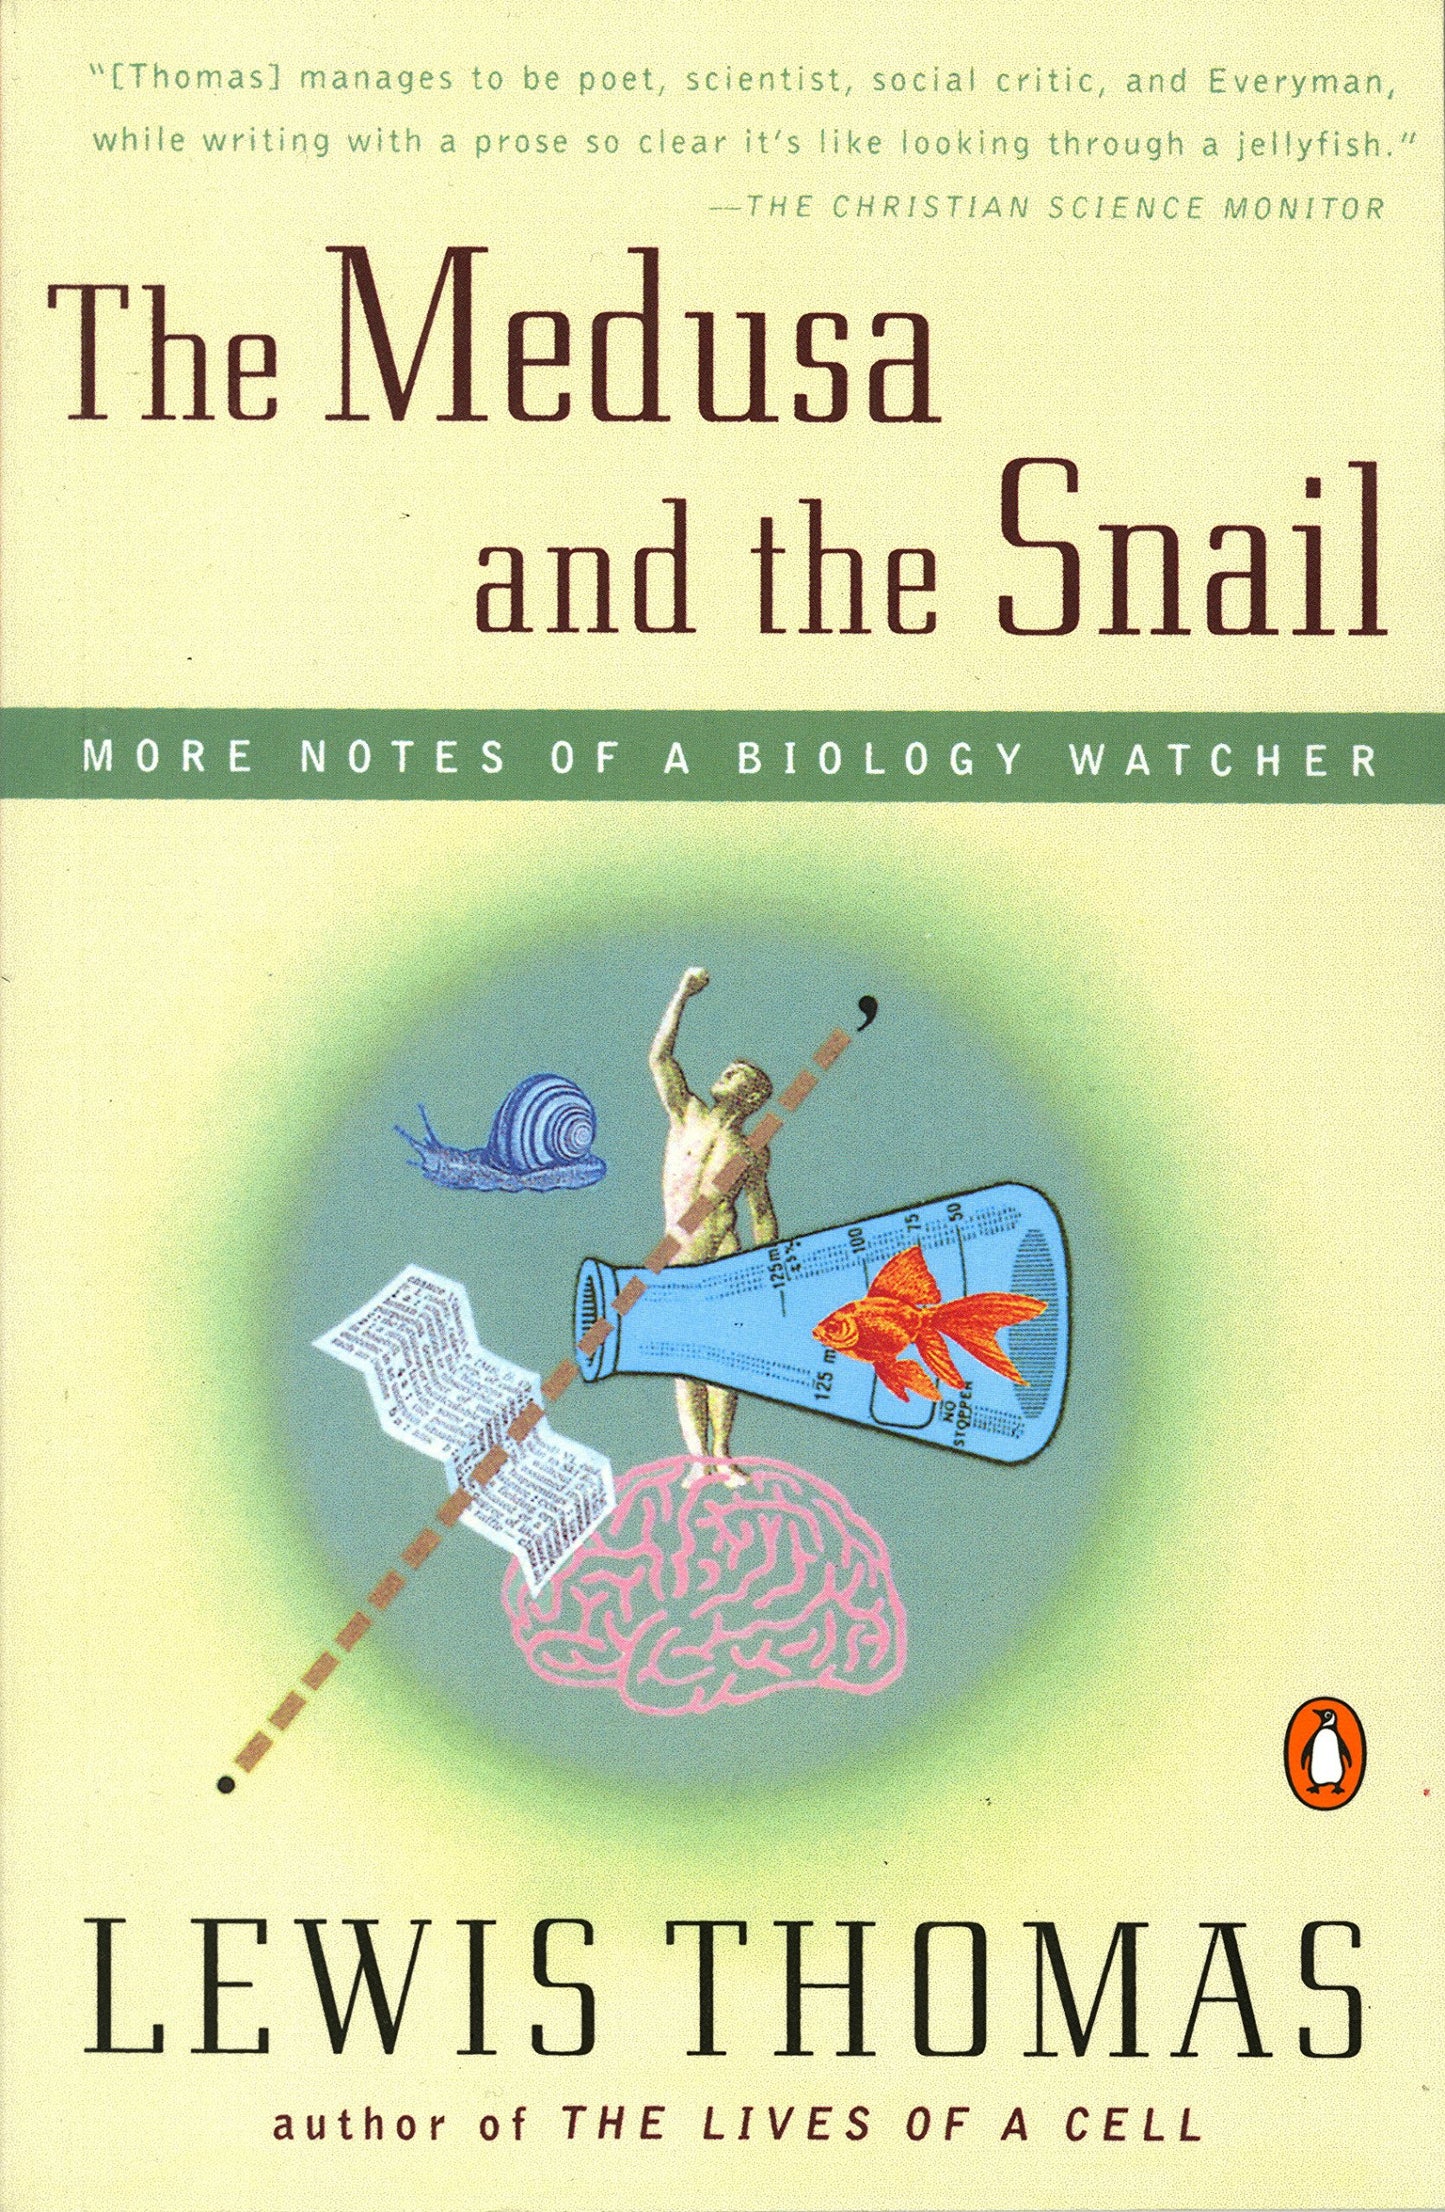 Medusa and the Snail: More Notes of a Biology Watcher